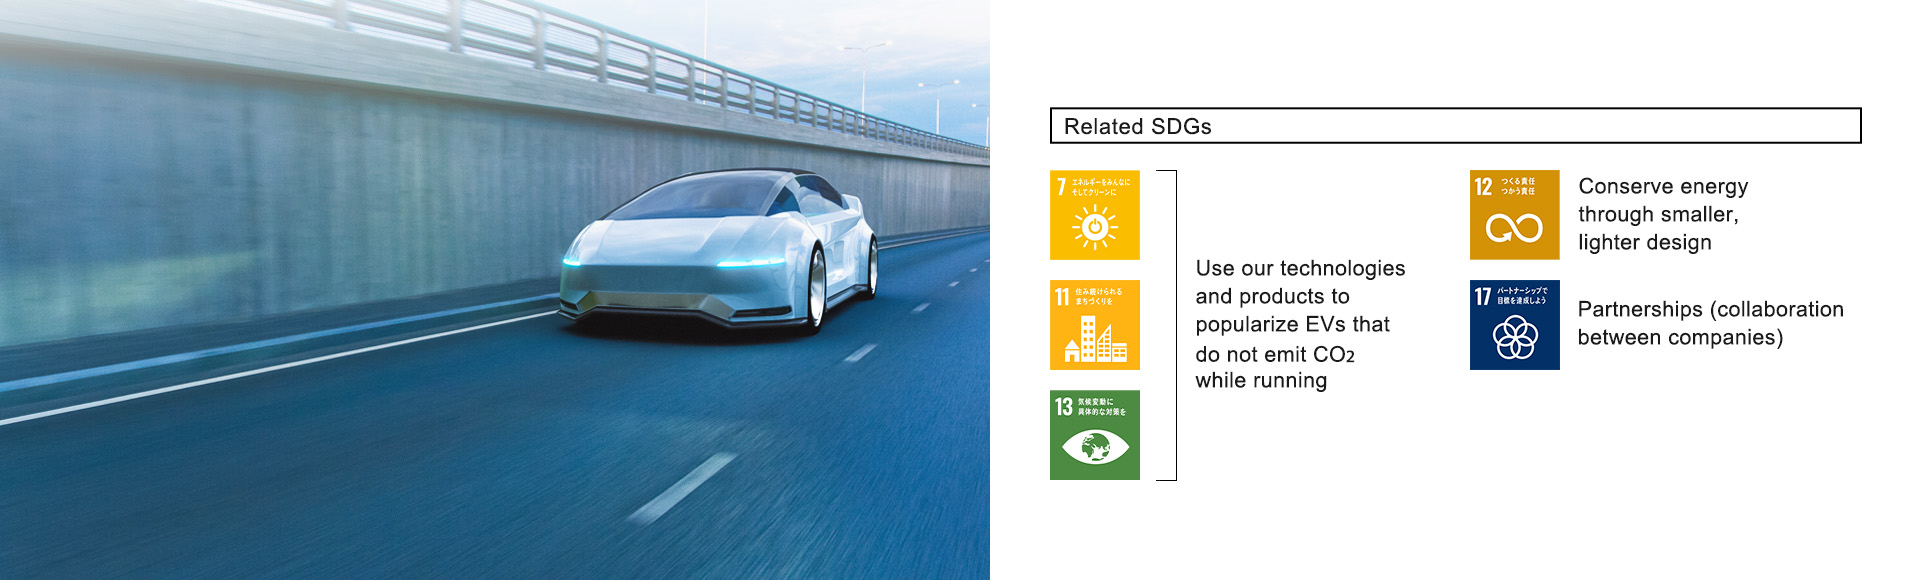 Related SDGs 7 Affordable and clean energy 11 Sustainable cities and communities 13 Climate Action: Visualization and reduction of vehicle CO2 emissions to help mitigate global warming, 12 Responsible Consumption and Production, 17 Partnership for the goals: Partnerships (collaboration between companies)